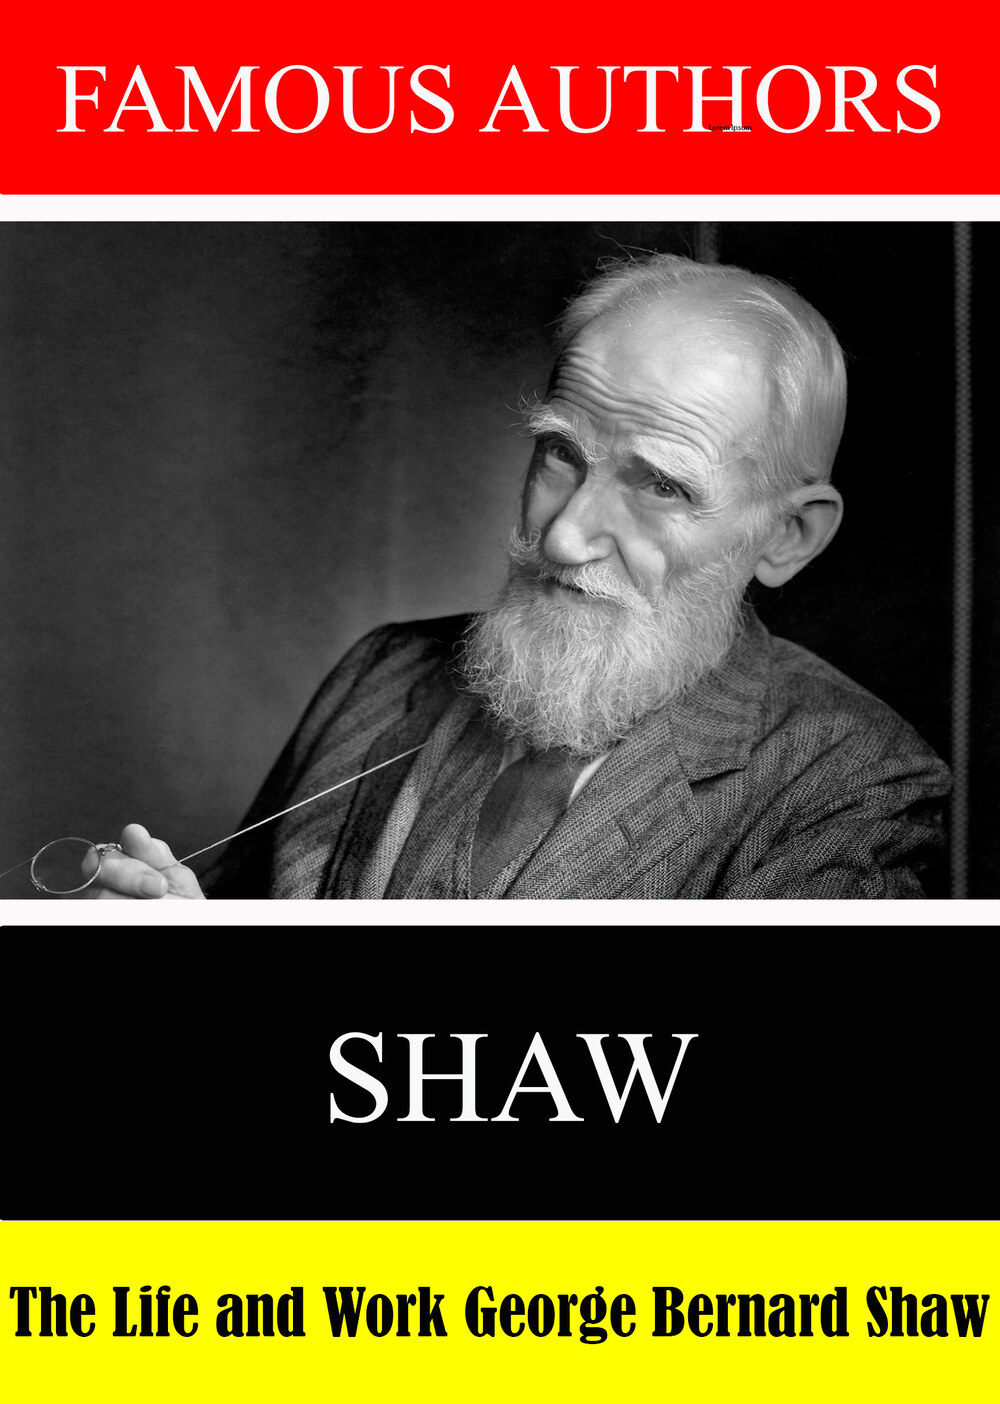 L7904 - Famous Authors: The Life and Work of George Bernard Shaw